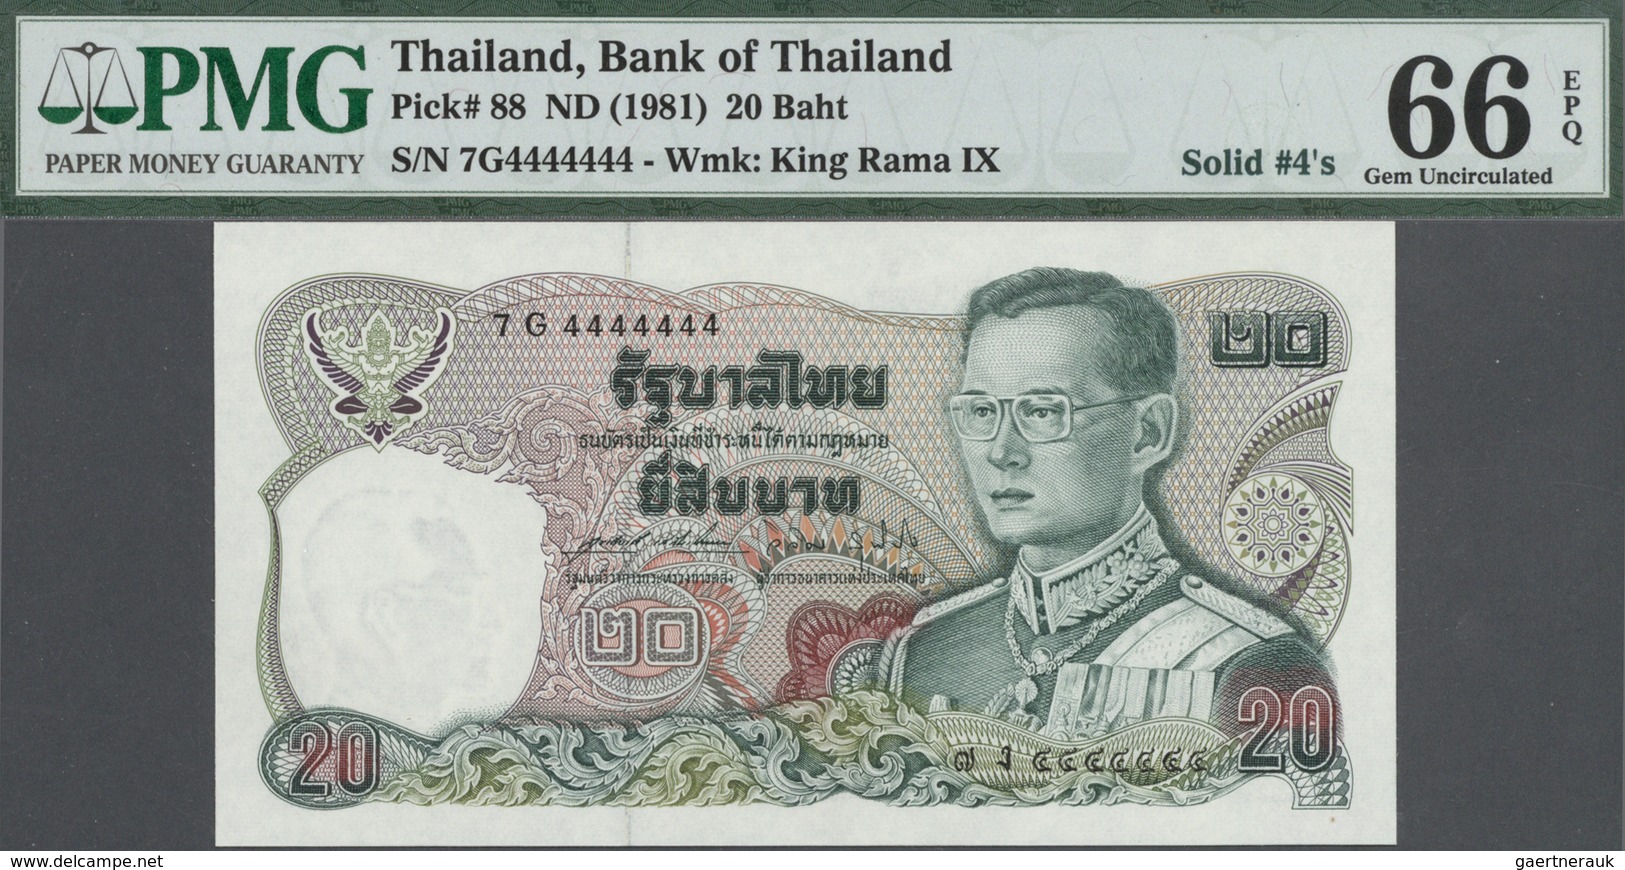 Thailand: set of 9 notes 20 Baht ND(1981) P. 88 with special serial numbers containing: 5G3333333, 7